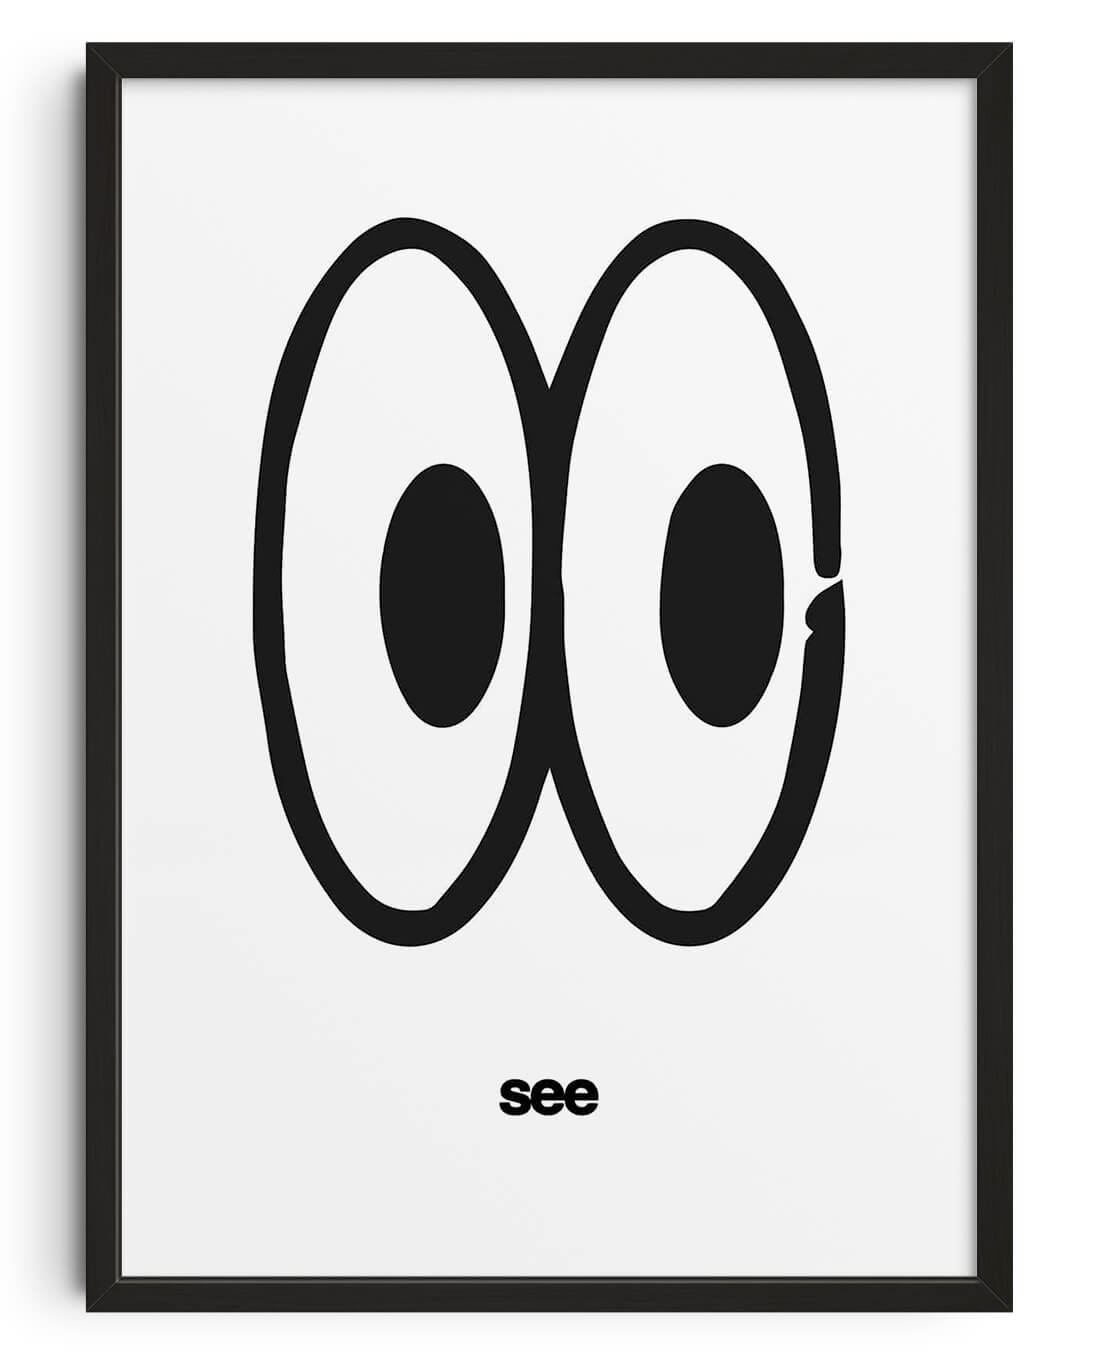 See by Adam Foster contemporary wall art print from DROOL